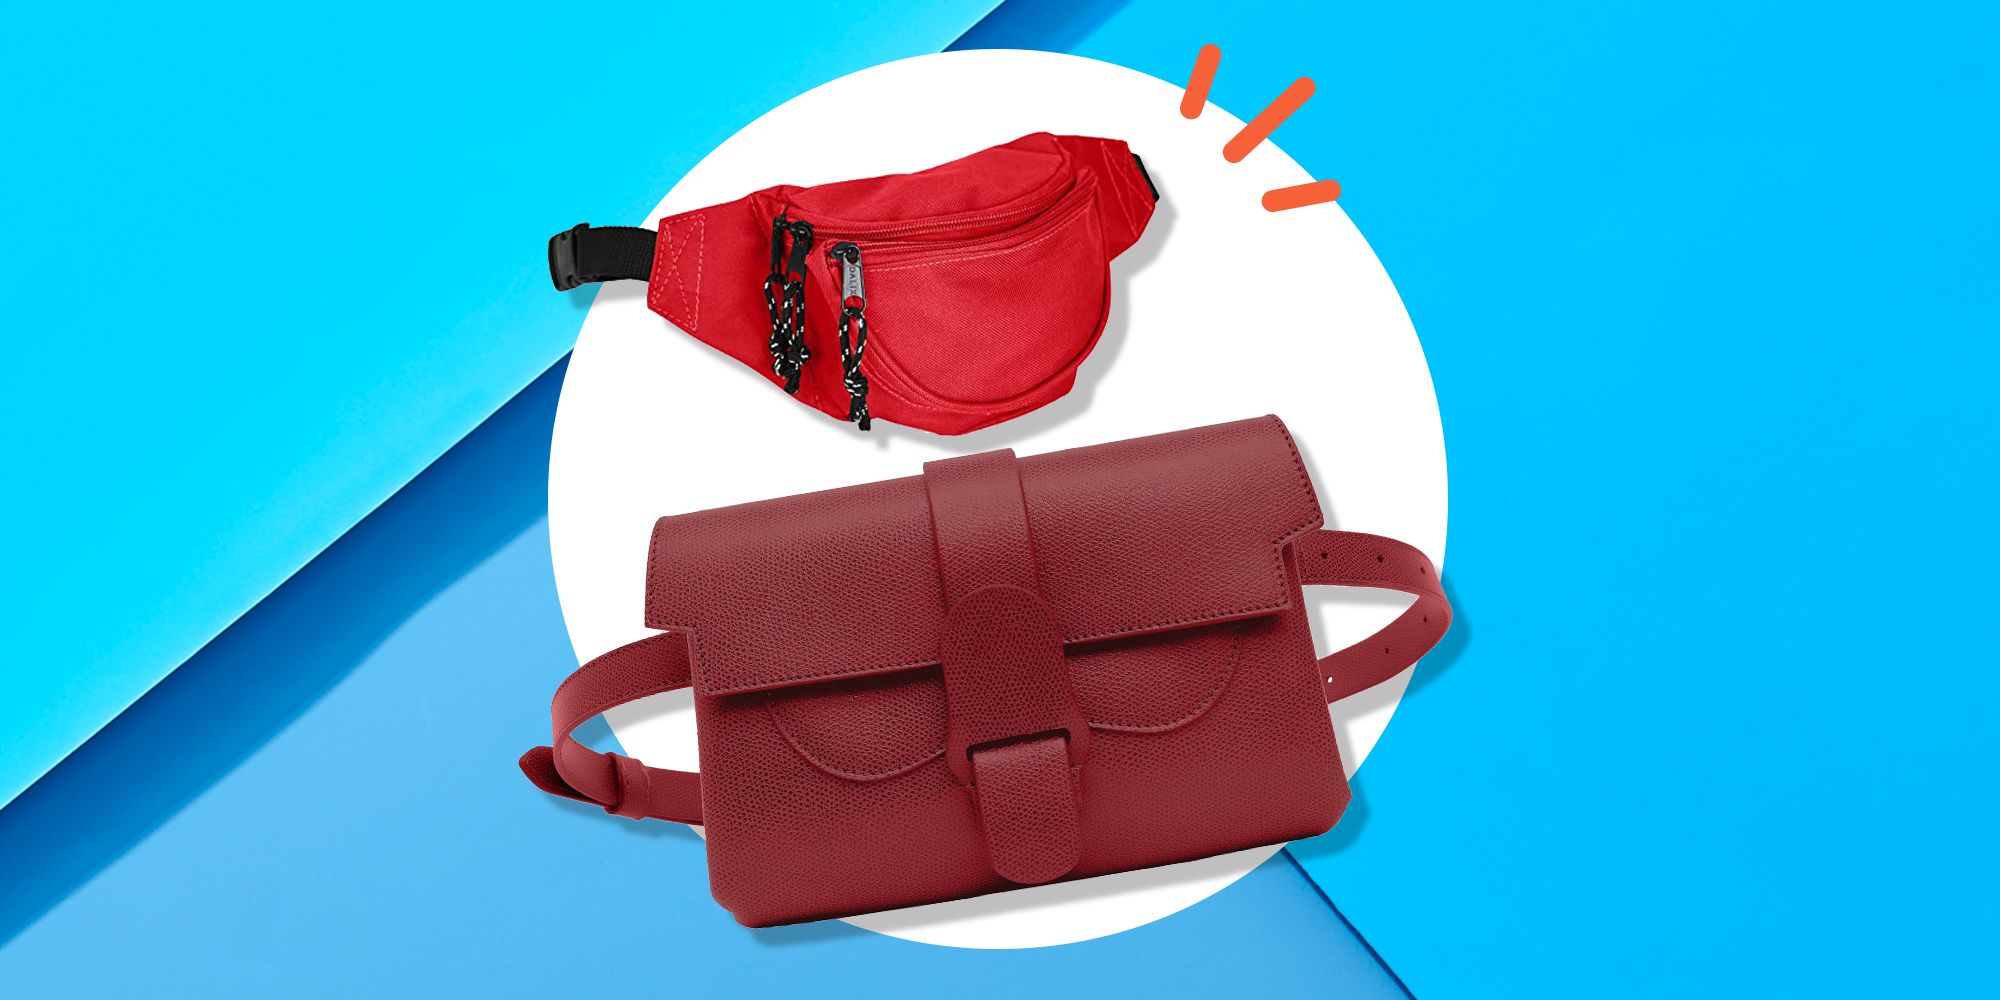 The 15 Best Waist Bags to Buy Right Now